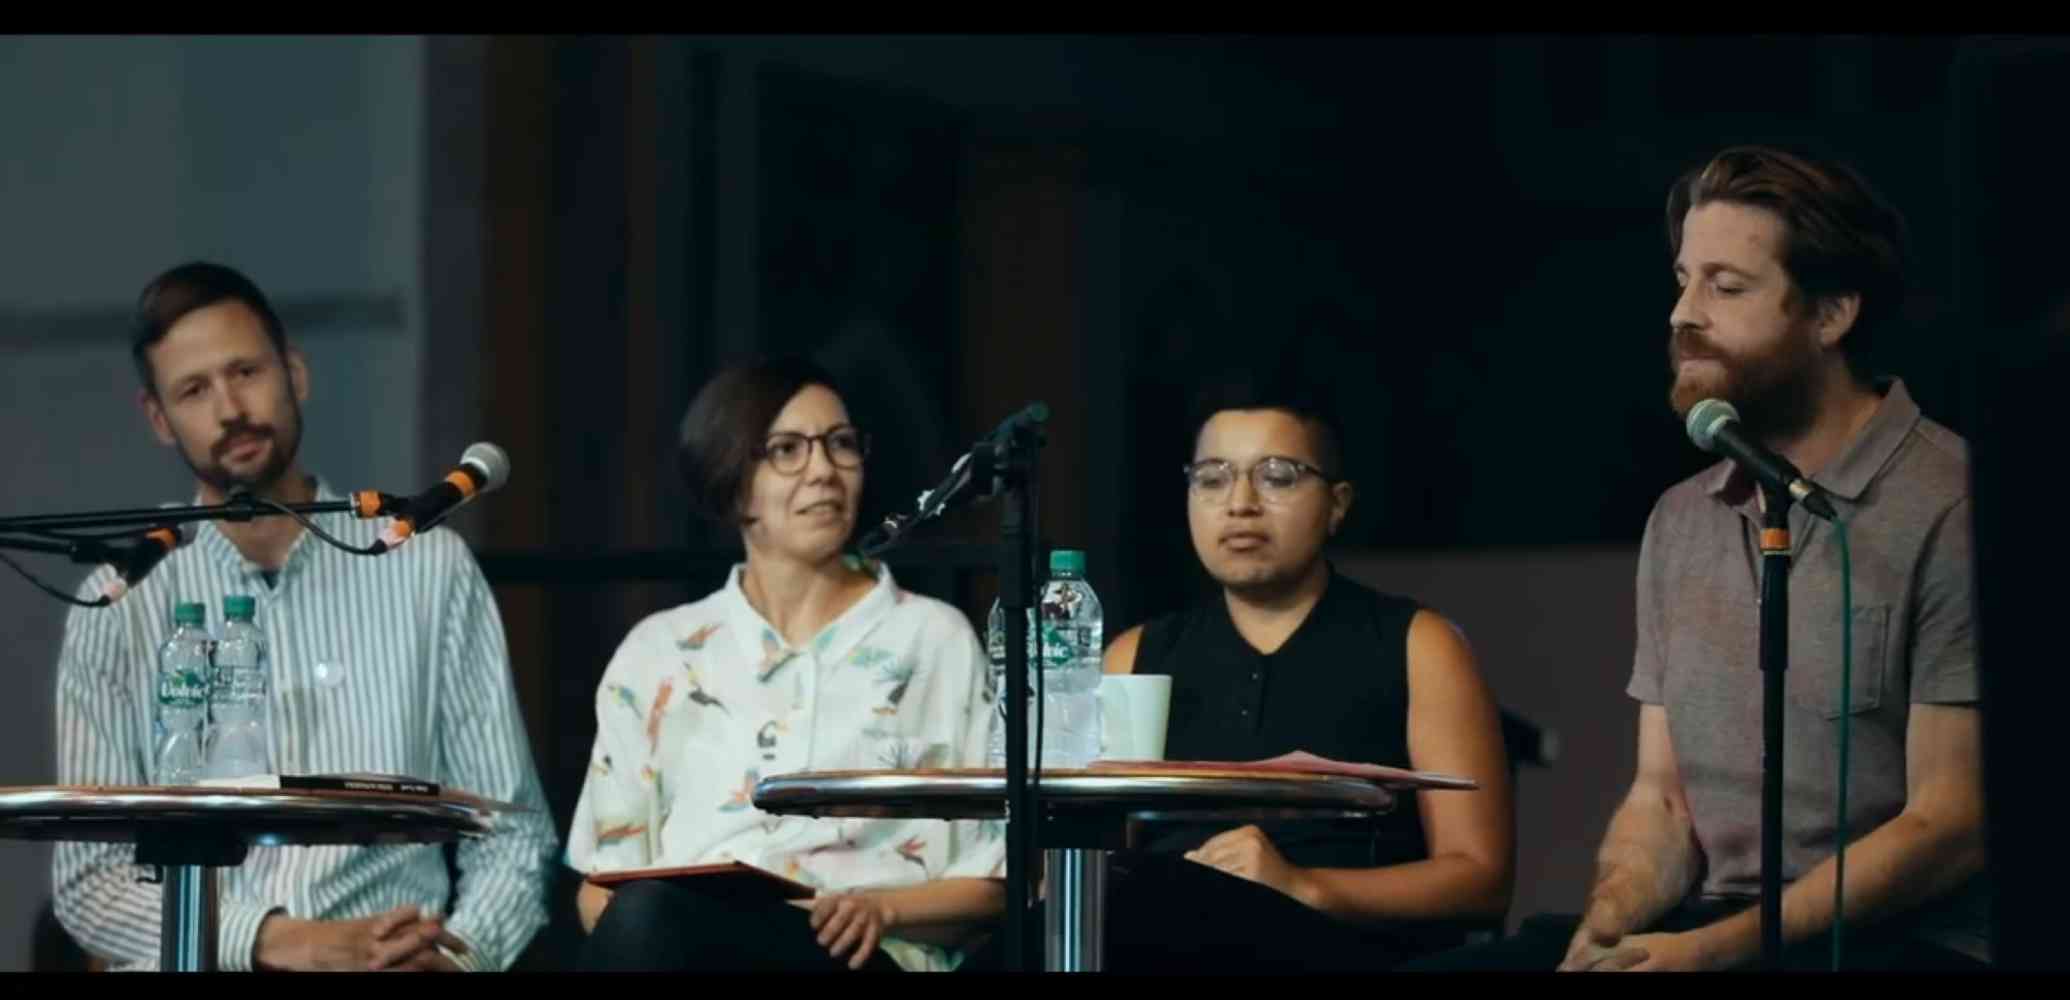 Speaking at 'The Coast is Queer', an LGBTQ+ literary festival held in Brighton, September 2019 - This panel, titled 'Queering the Classroom: a roundtable on queer writing, (in)visibility and the curriculum', brought together myself, Dr Vedrana Velickovic (University of Brighton), Dr Sita Balani (King's College London) and Dr Samuel Solomon (University of Sussex). The speakers considered the specific challenges that come from bringing discussions of LGBTQ+ texts into mixed classes, as well as the occasional opportunities to teach predominantly queer groups of students. We discussed how we came to spend so much time with queer texts, and what motivates our students to join us. We asked: How do we talk to each other about sexuality in the context of our uneven power relationships? And what kinds of queer connections and world making are enabled and stifled by the university setting? The Coast is Queer festival was organized by New Writing South and the Marlborough Theatre.